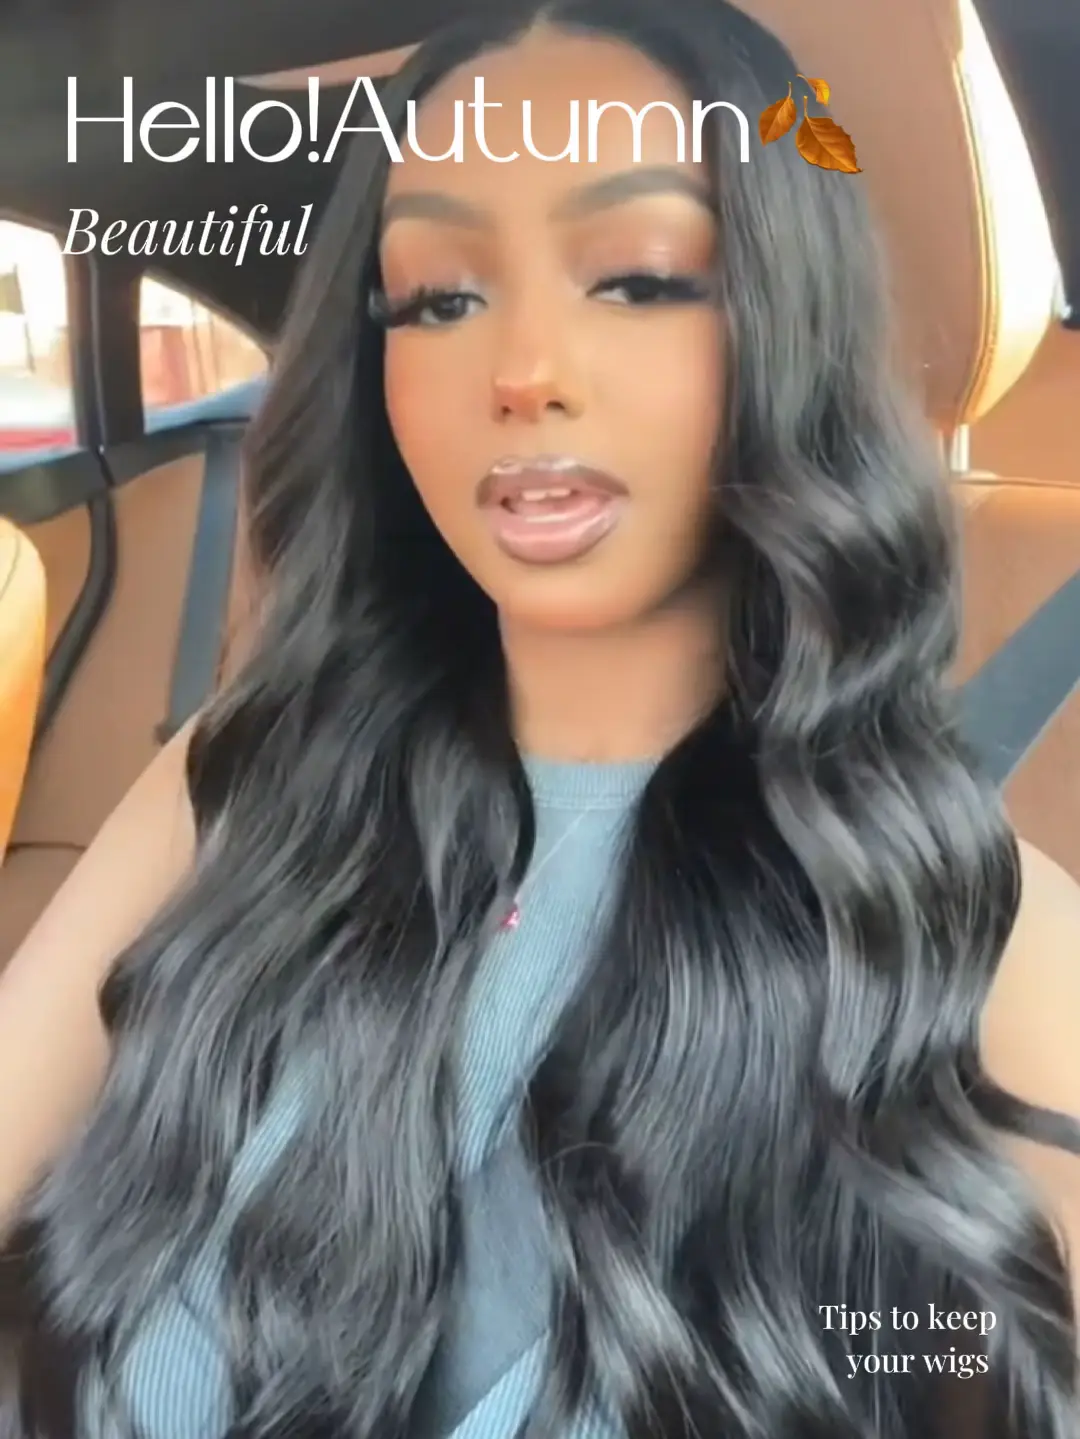 Wig Installs, Video published by AsakebyRoyalty